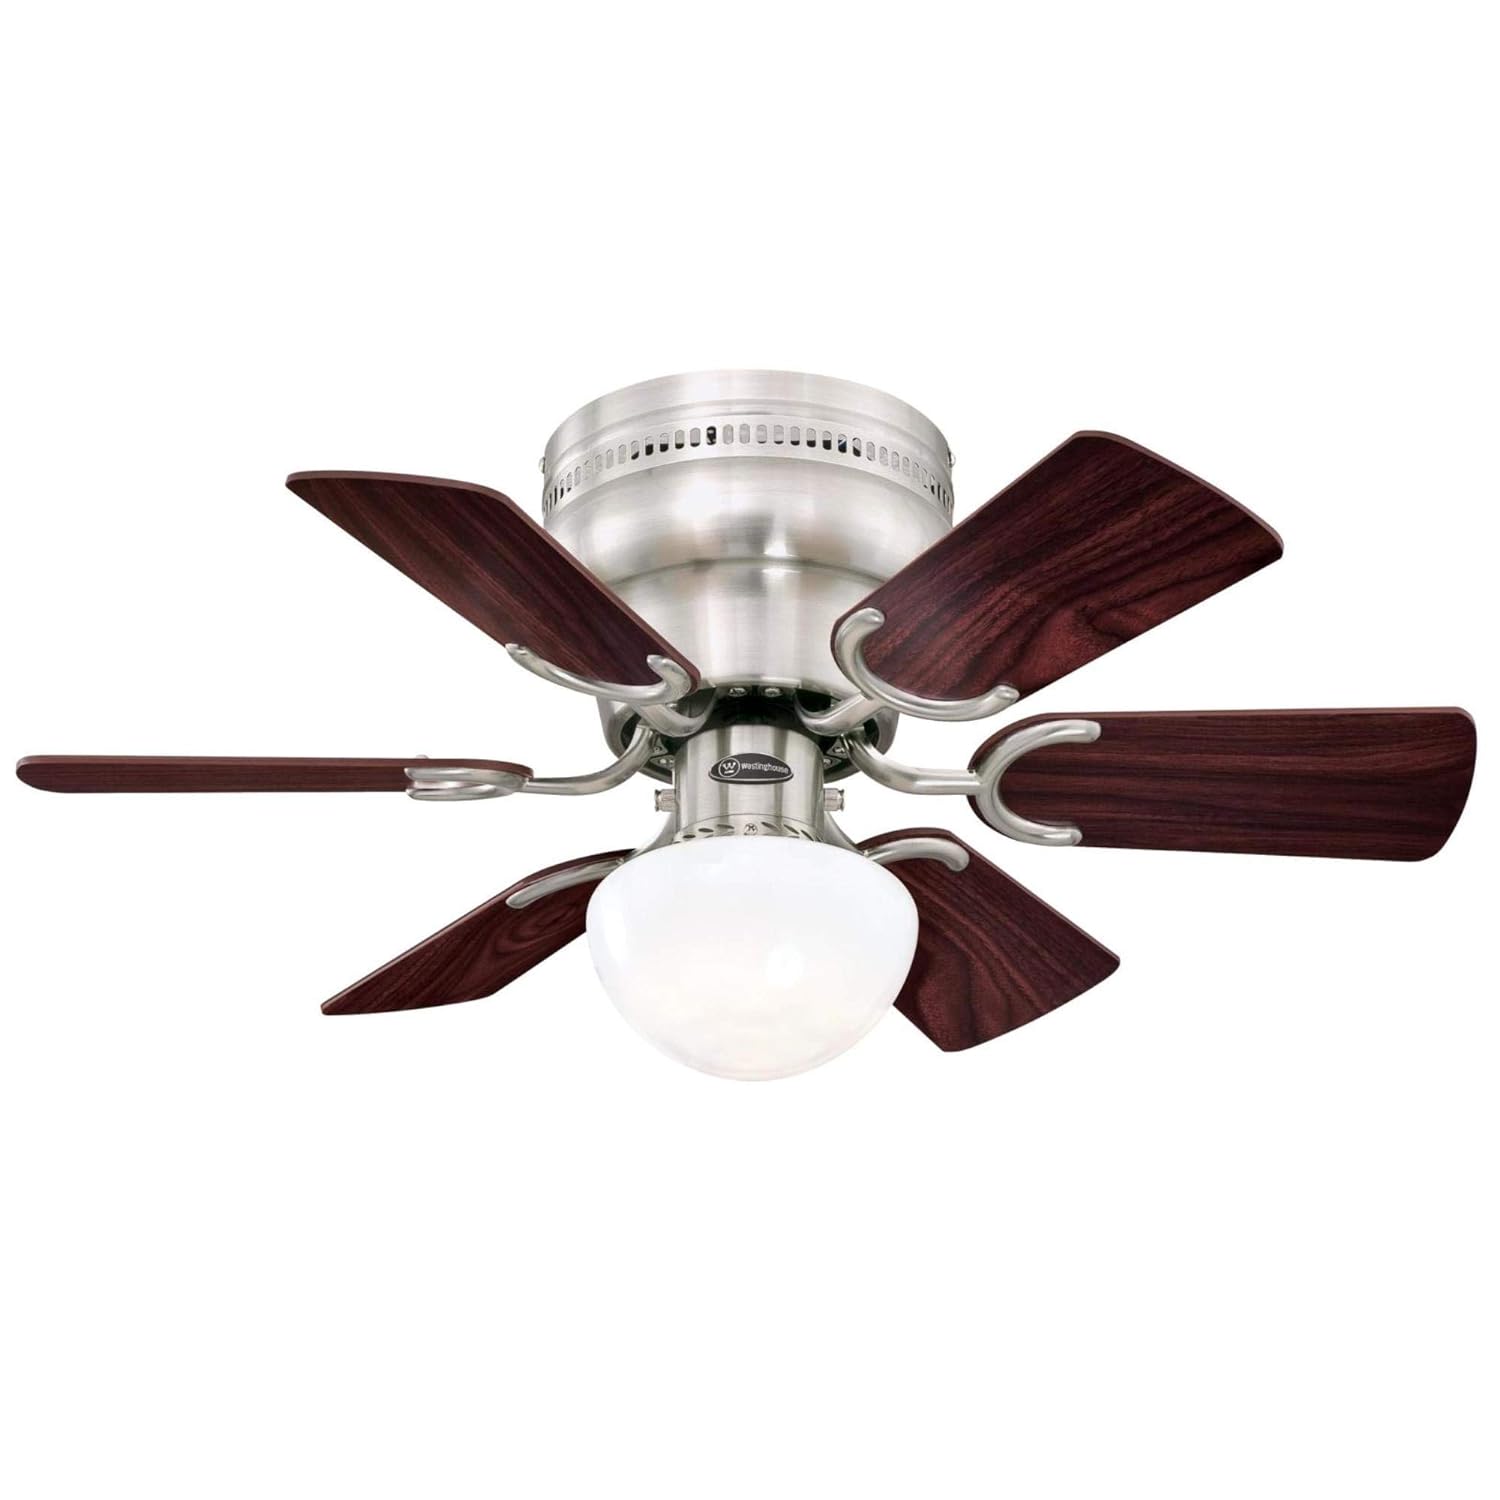 30 Inch Ceiling Fans With Light, 22 Inch Ceiling Fan